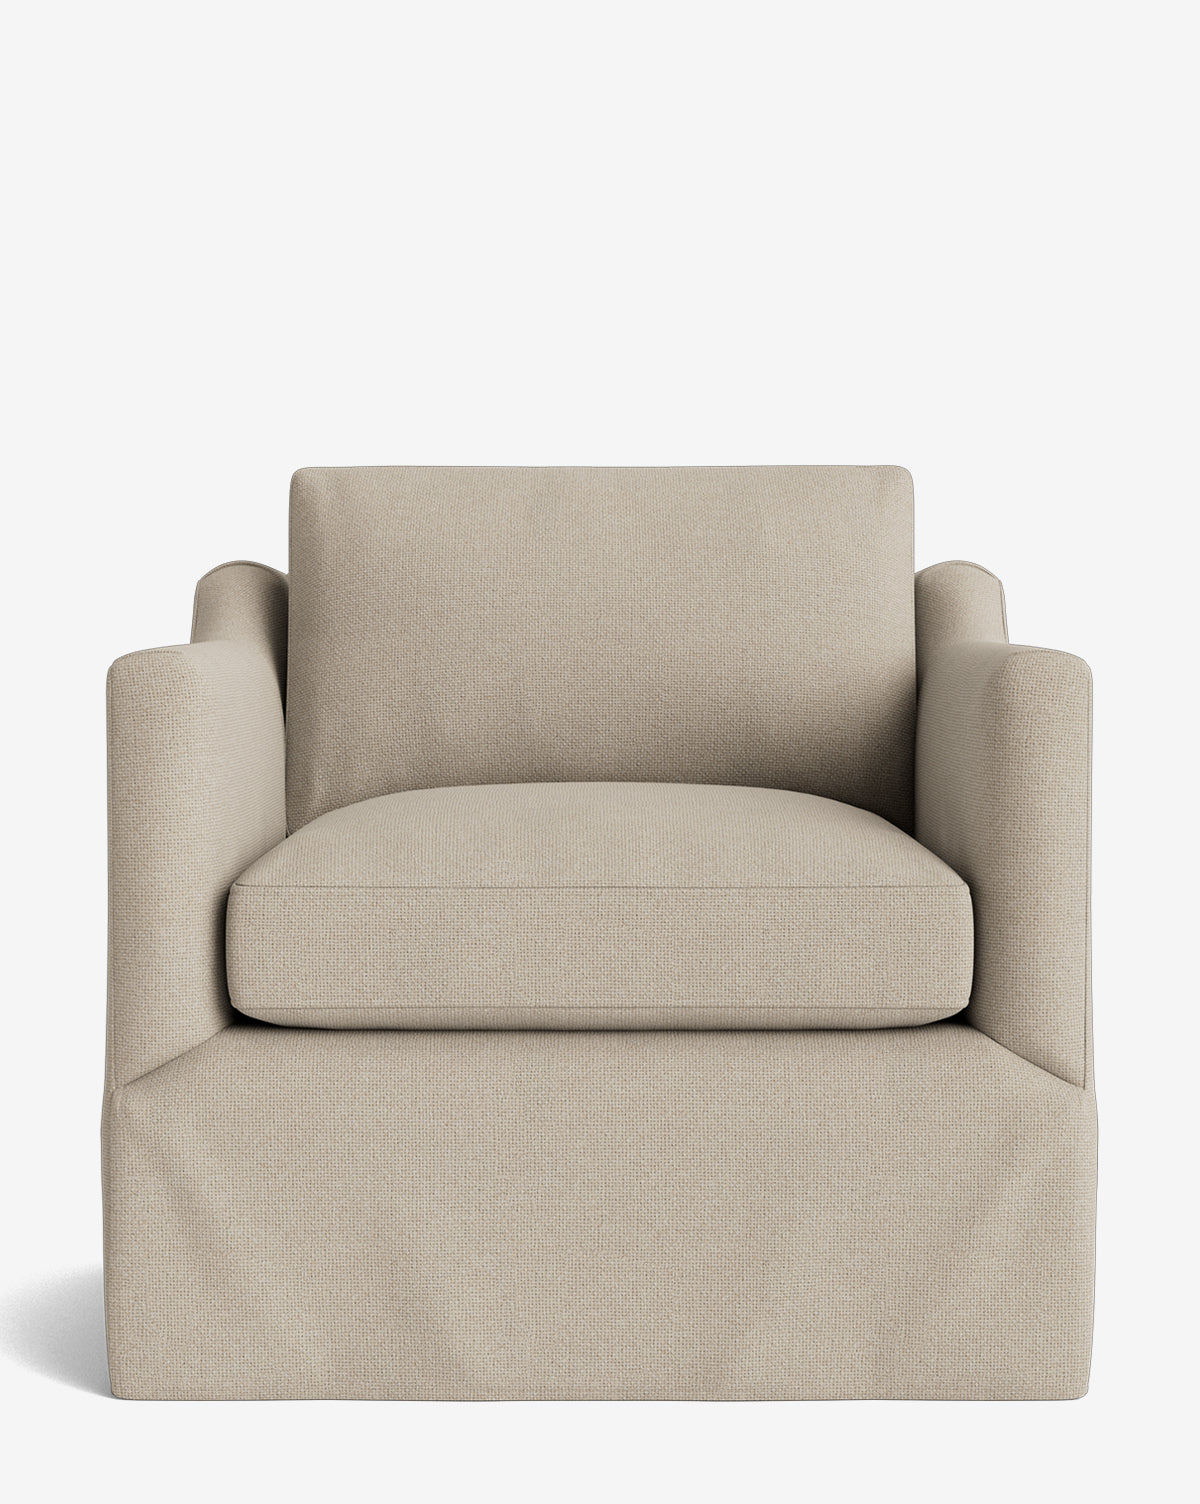 Rowe Fine Furniture, Haverford Slipcover Lounge Chair